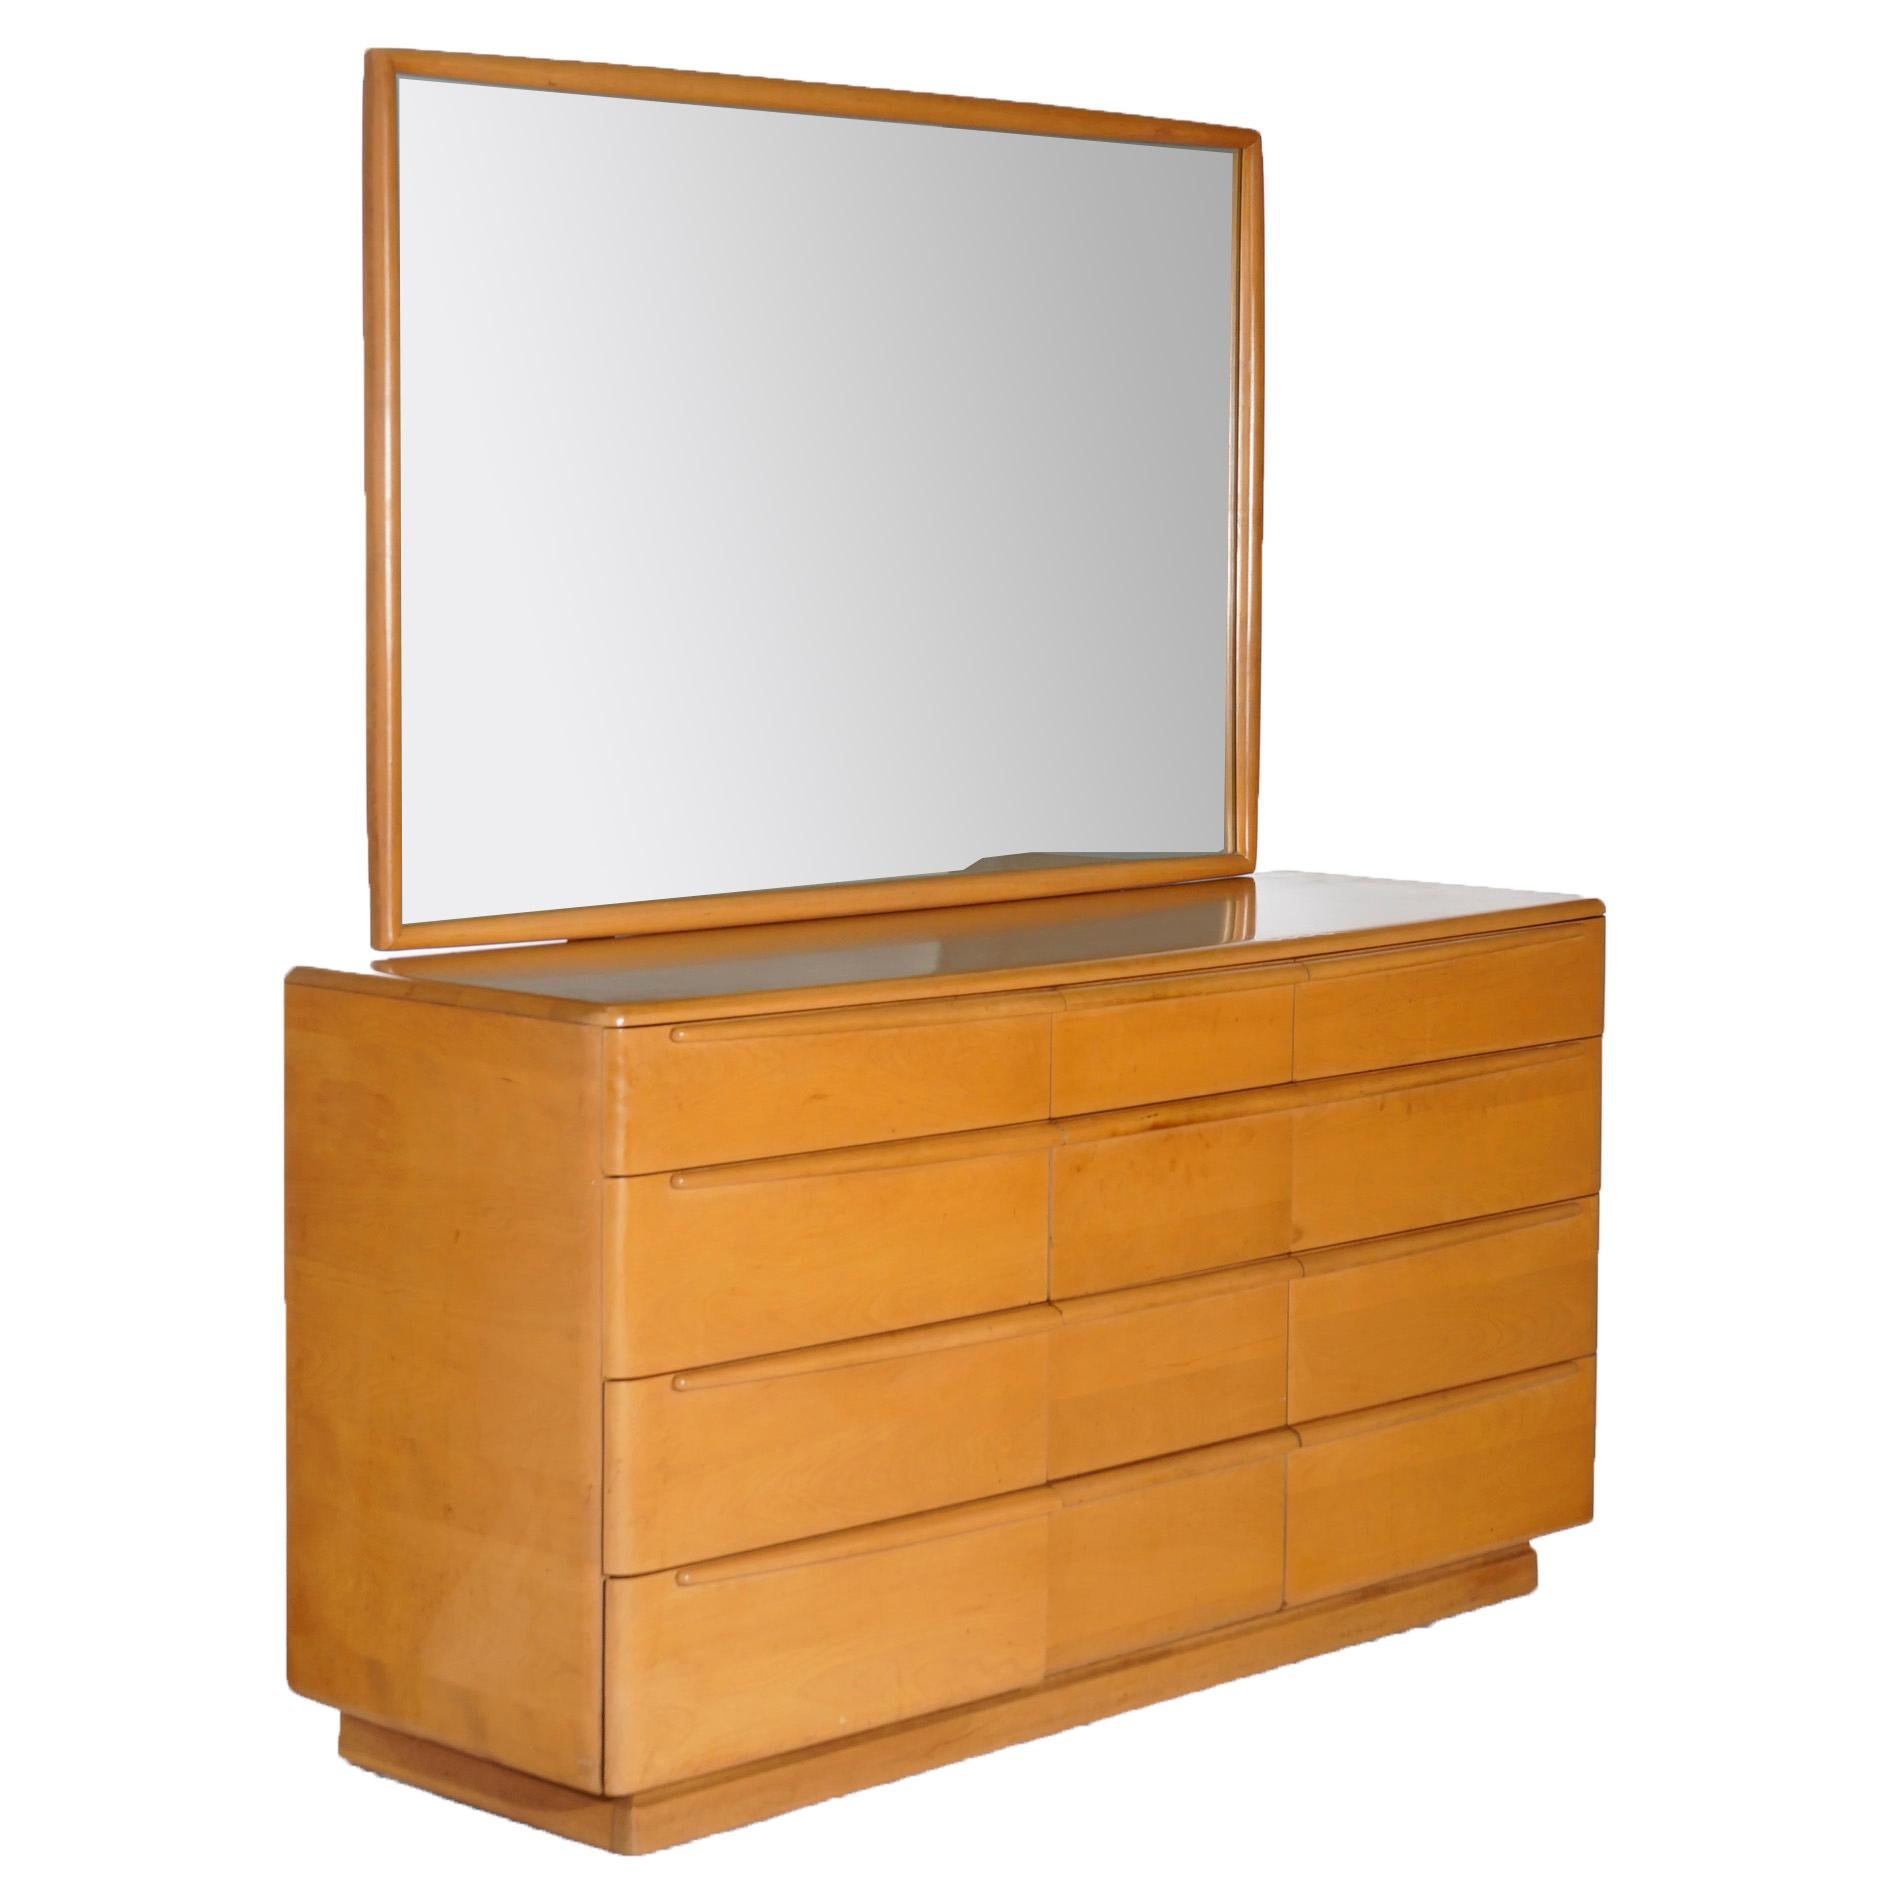 A Mid-Century Modern mirrored dresser by Heywood Wakefield offers birch construction with three four-tower drawers, Champagne finish, maker mark as photographed, c1950.

Measures- 68''H x 62.25''W x 20''D.